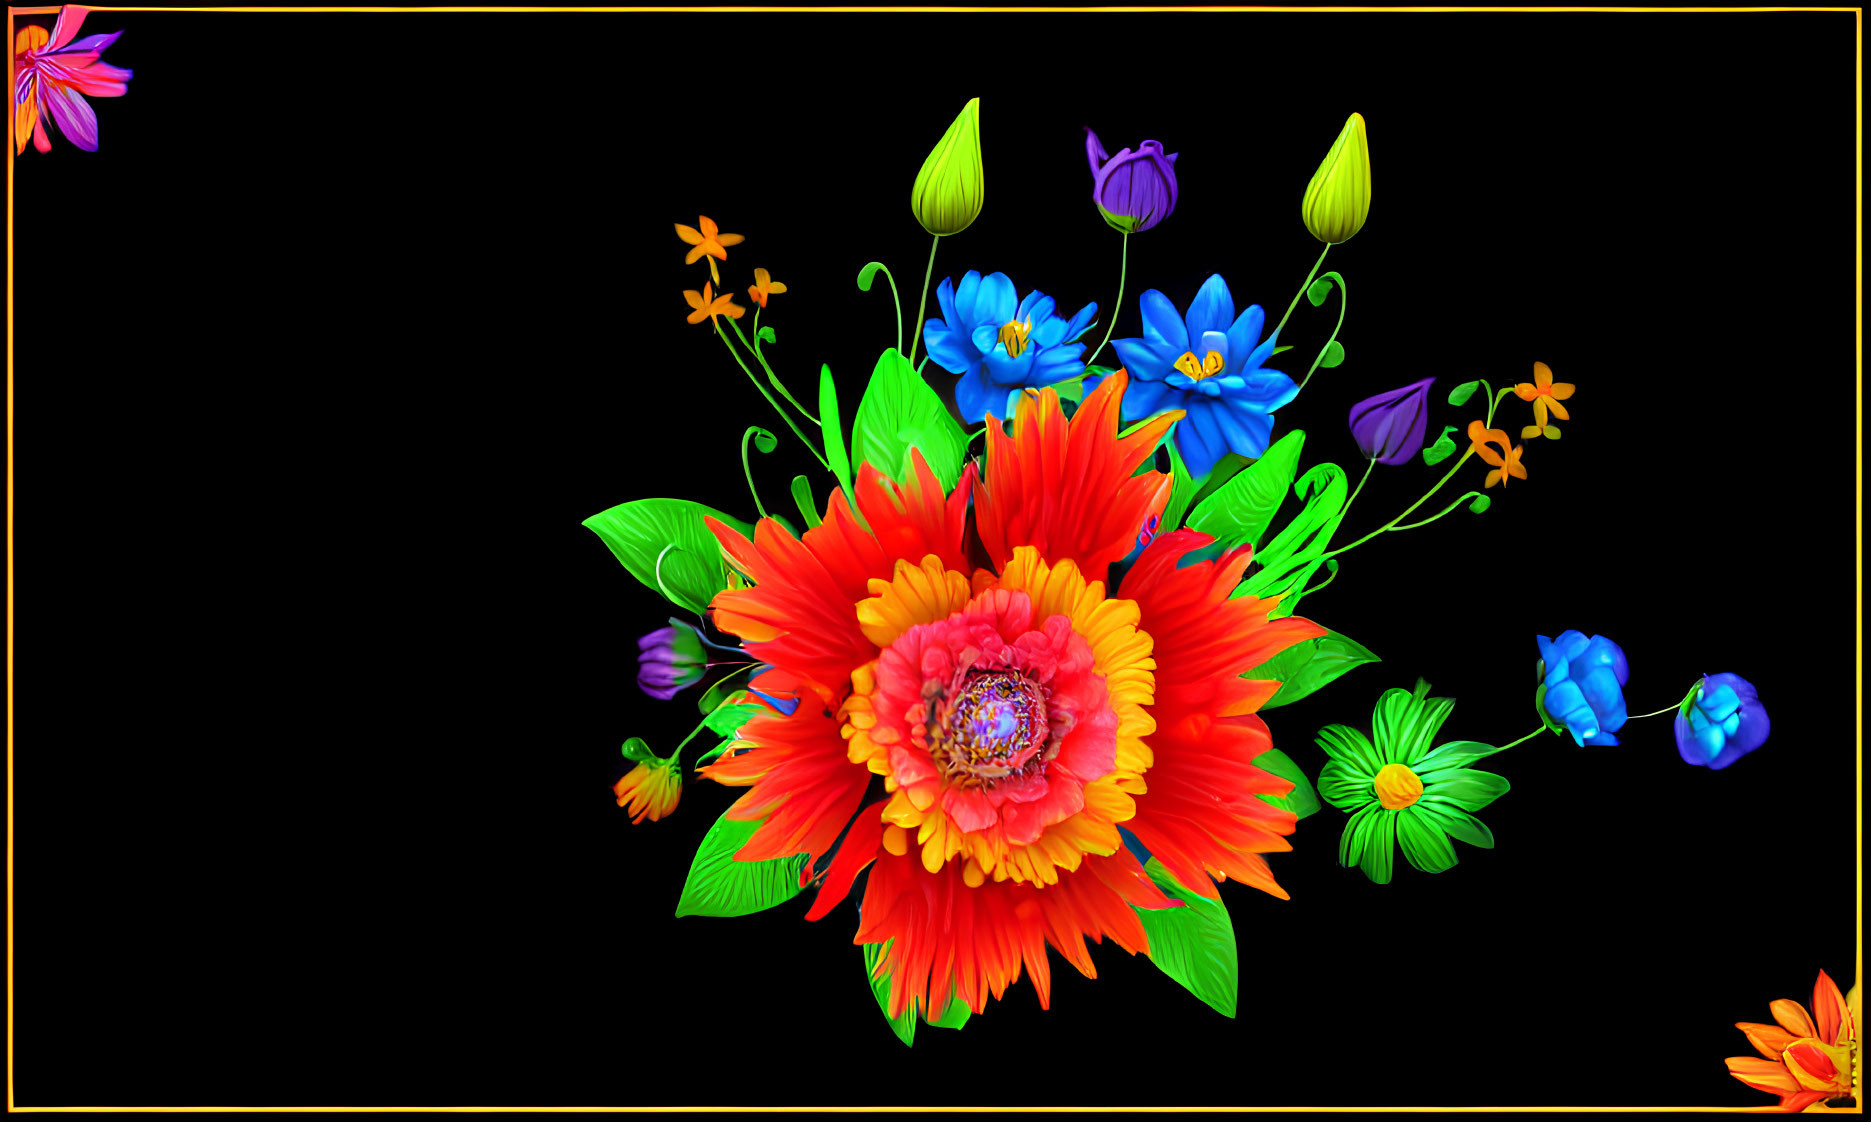 Colorful Digital Bouquet with Red, Blue, Orange, and Purple Flowers